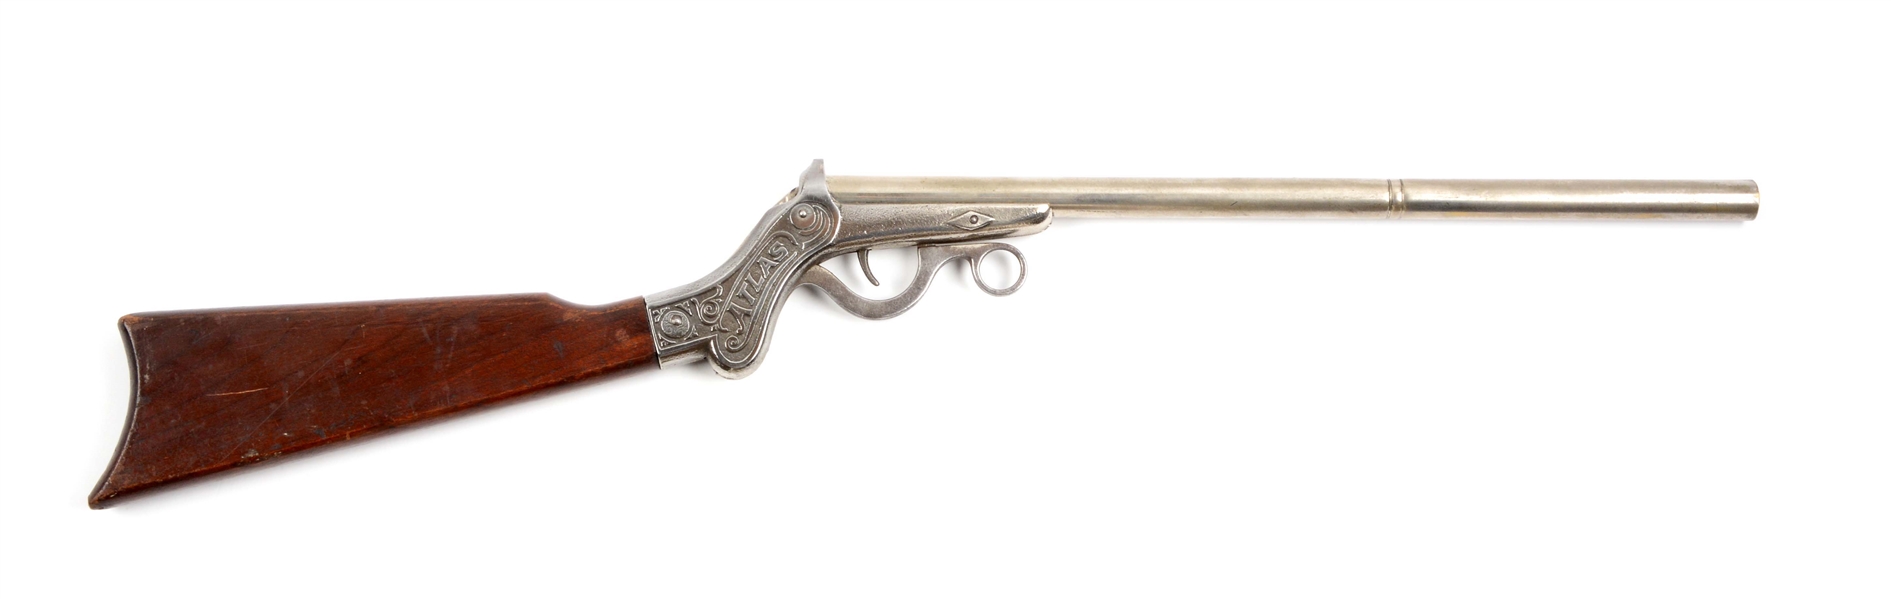 1900 ATLAS LEVER ACTION REPEATER.